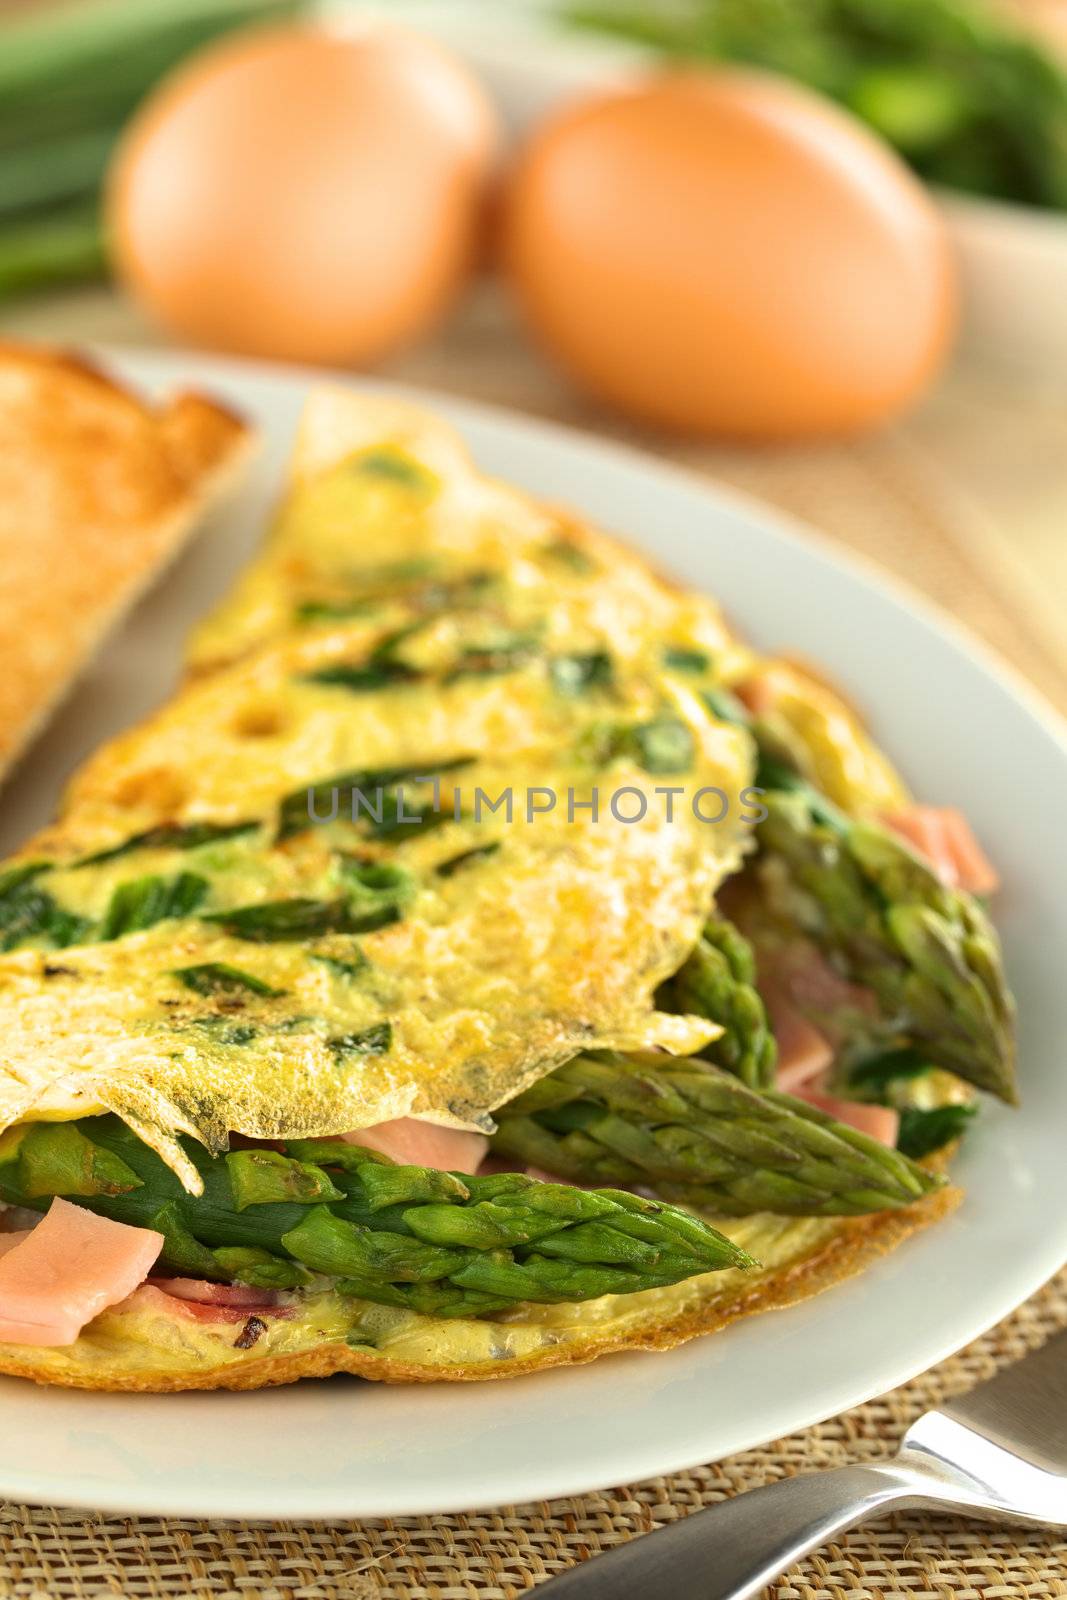 Asparagus and Ham Omelet by ildi